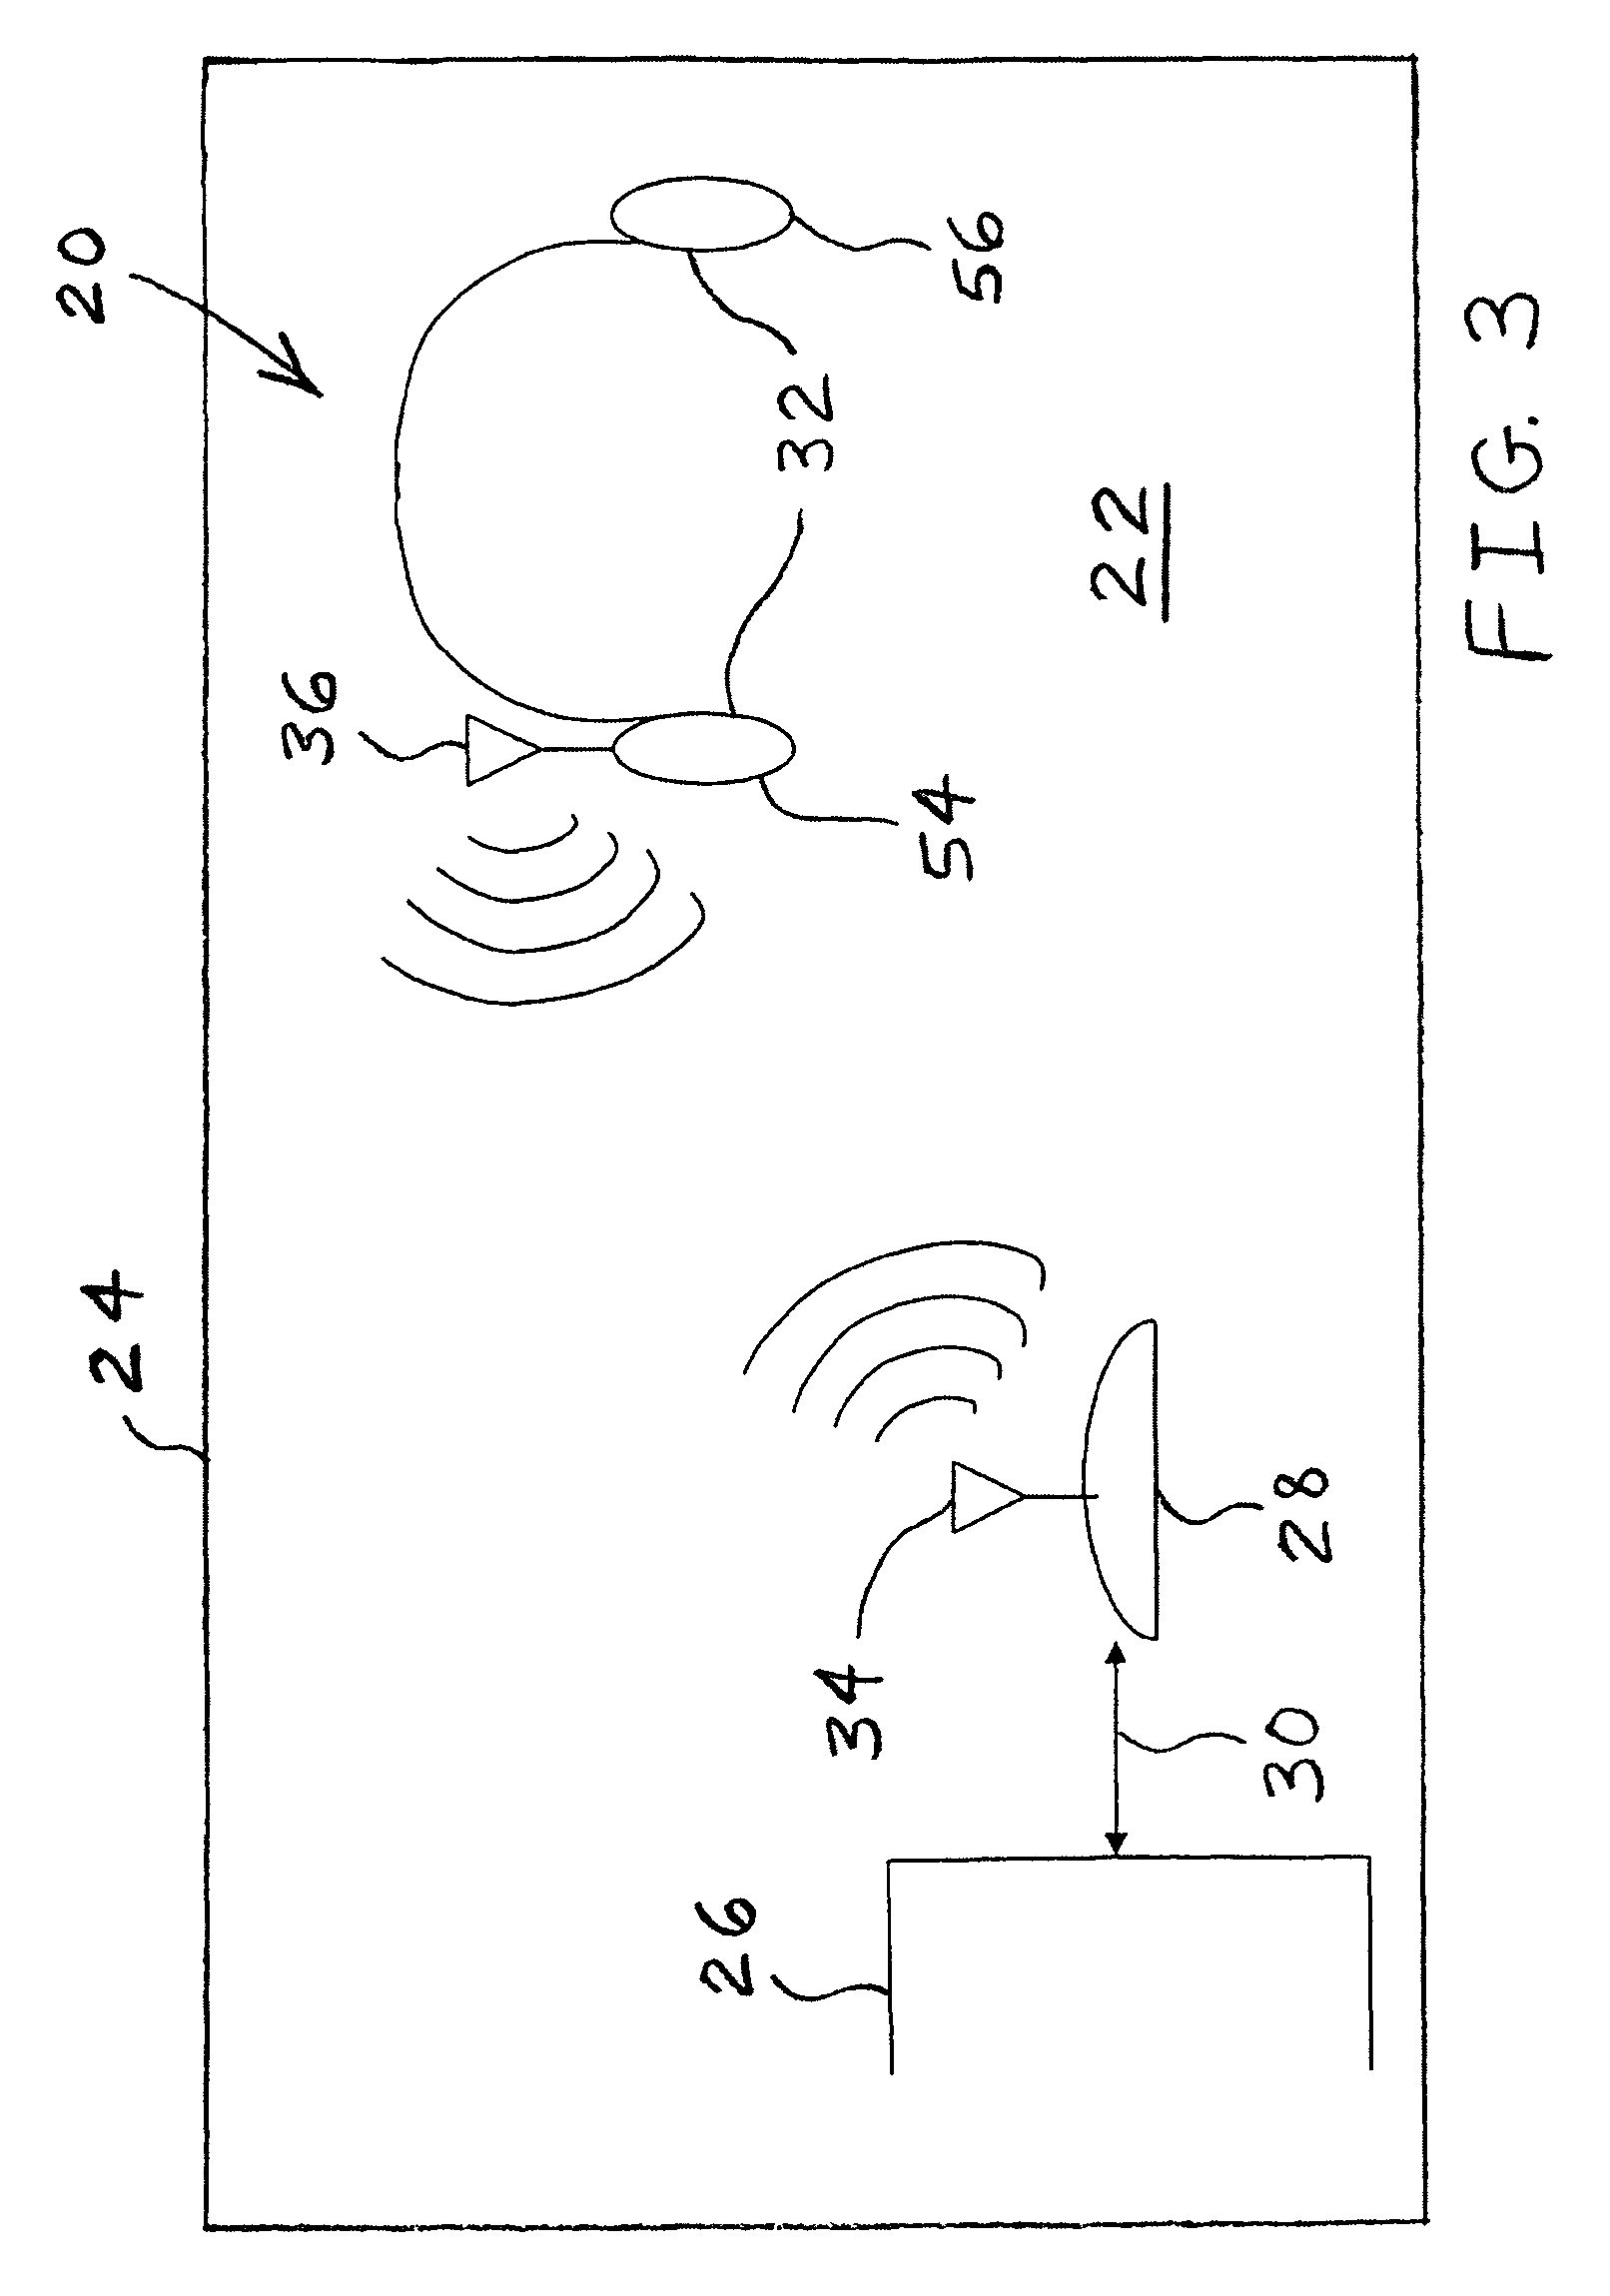 Low latency ultra wideband communications headset and operating method therefor